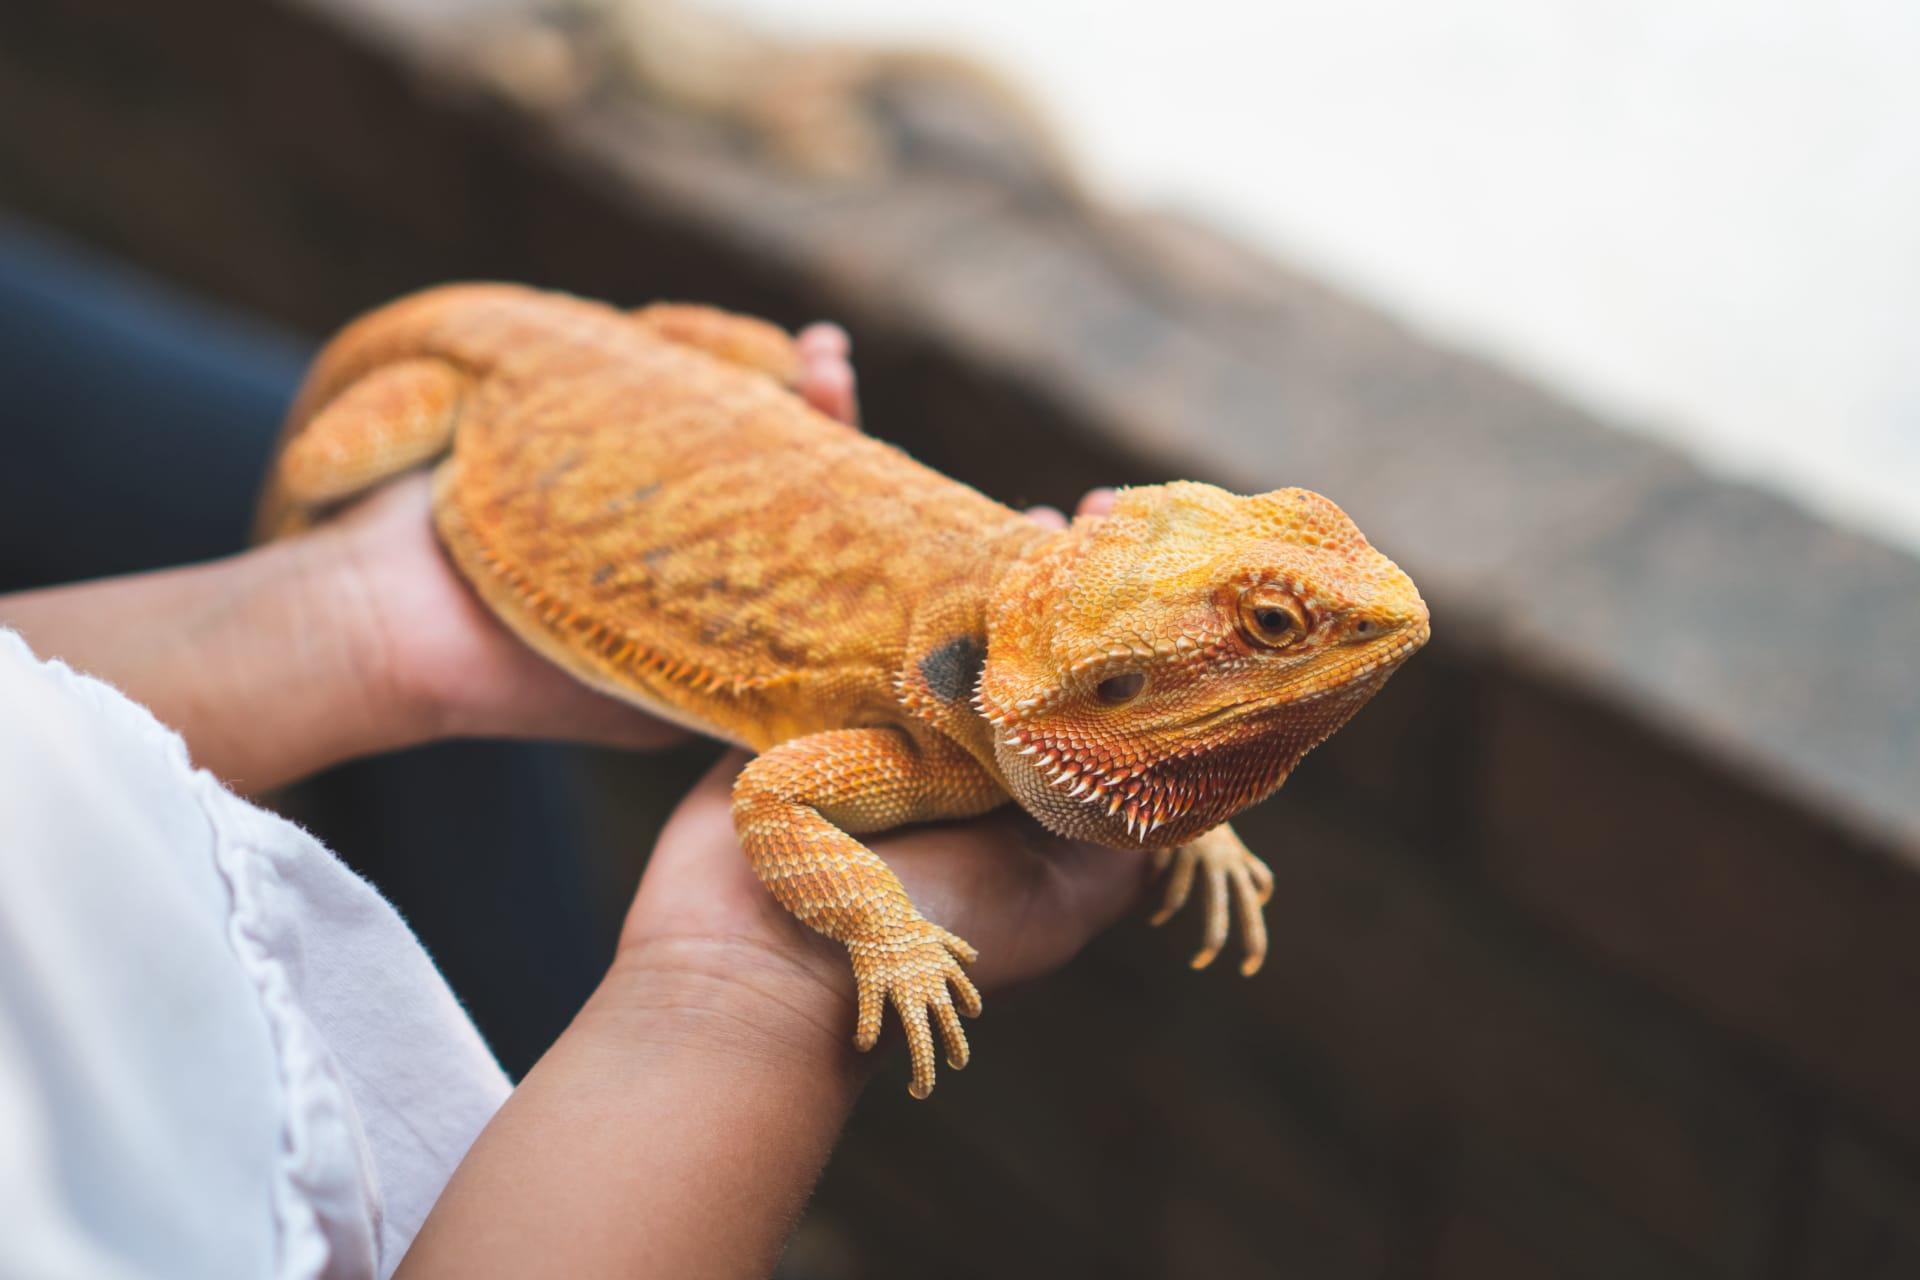 Red bearded dragon pictures